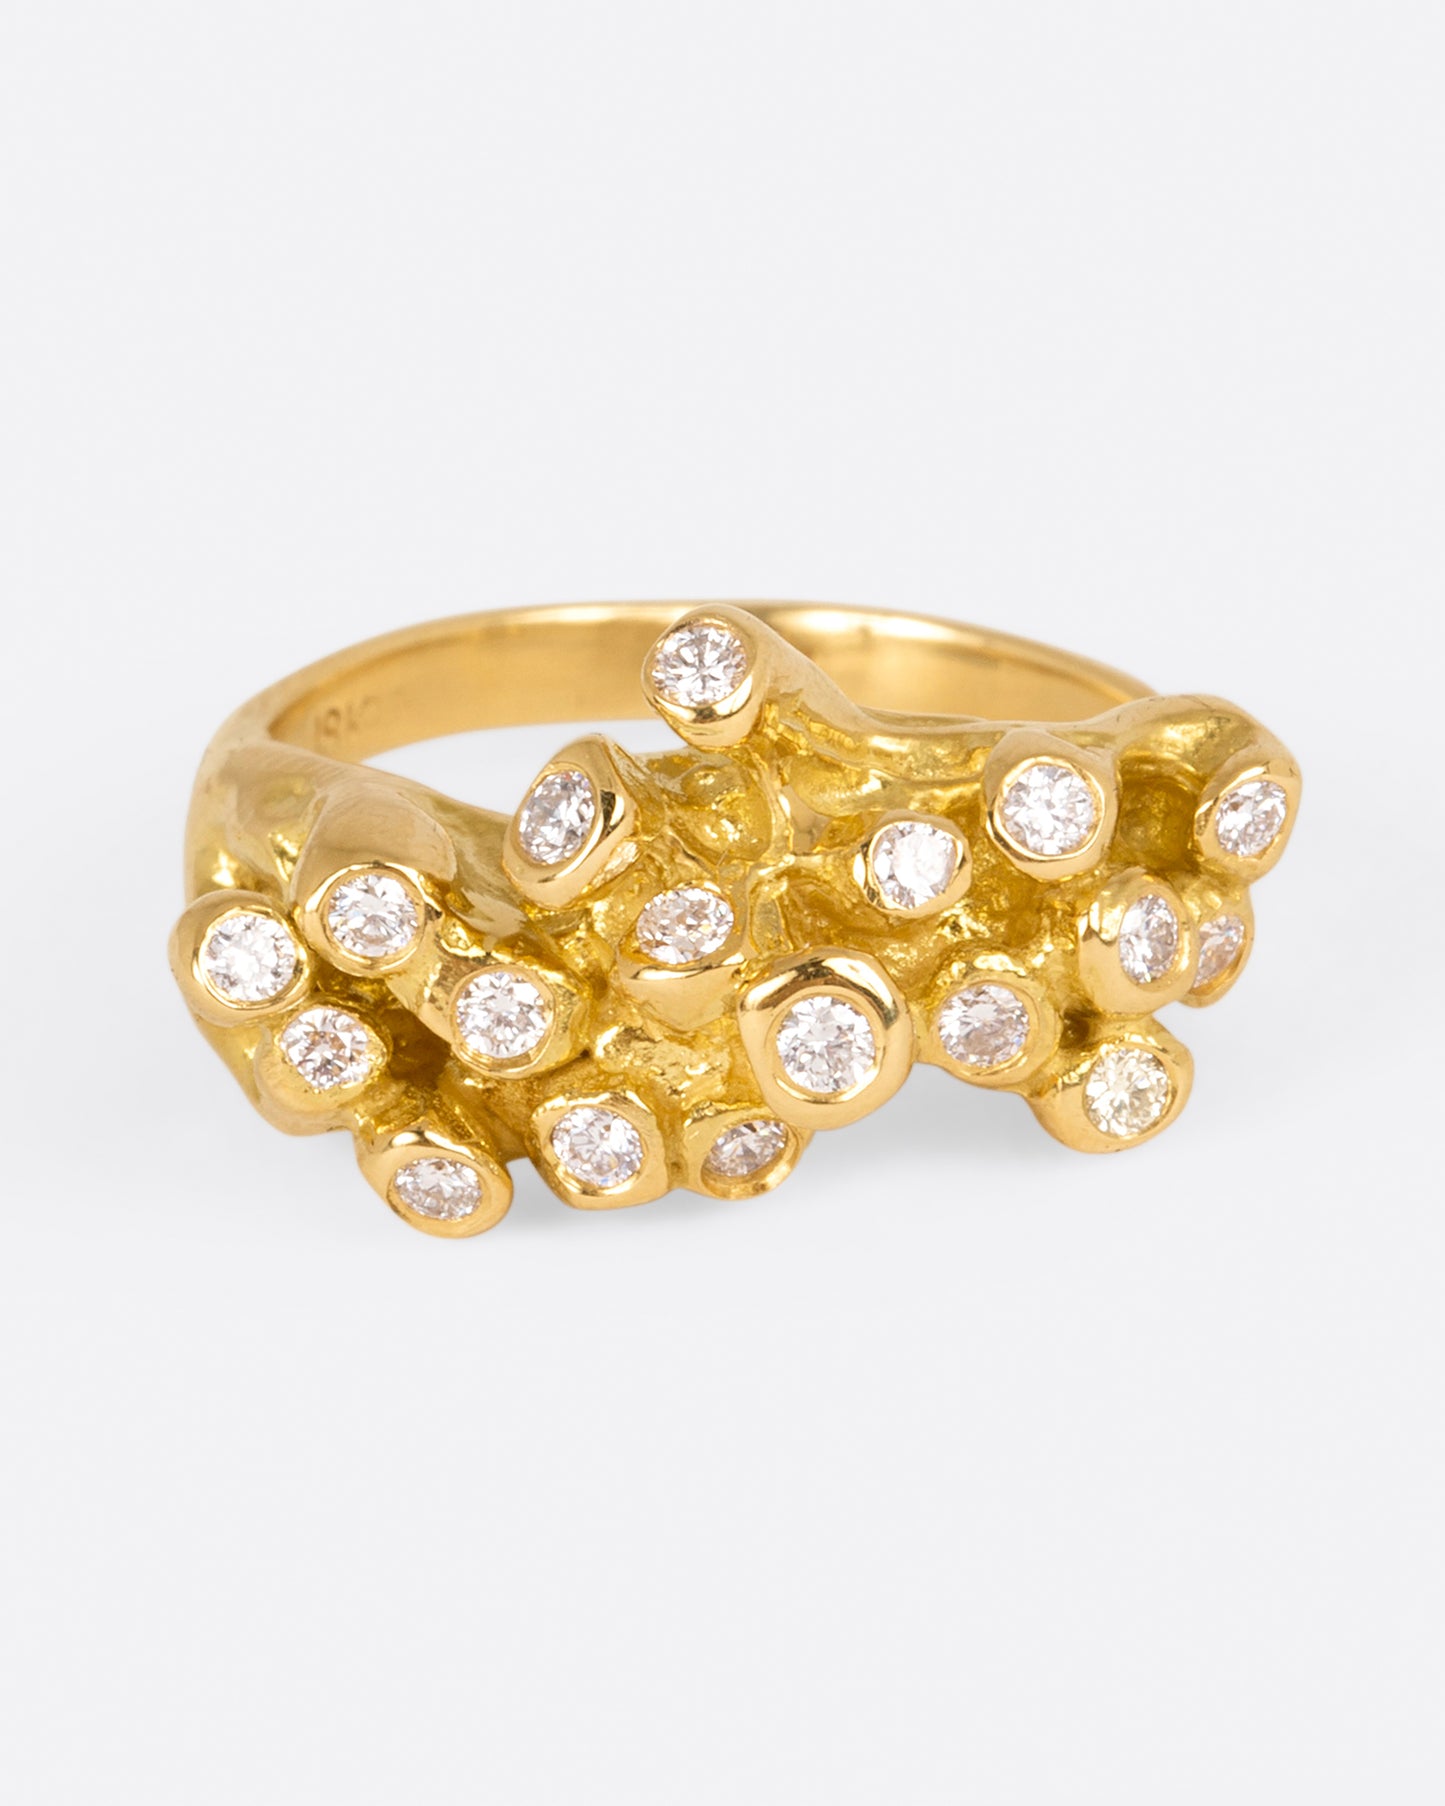 A yellow gold ring with sea anemone tentacles, dotted with diamonds, shown from front.